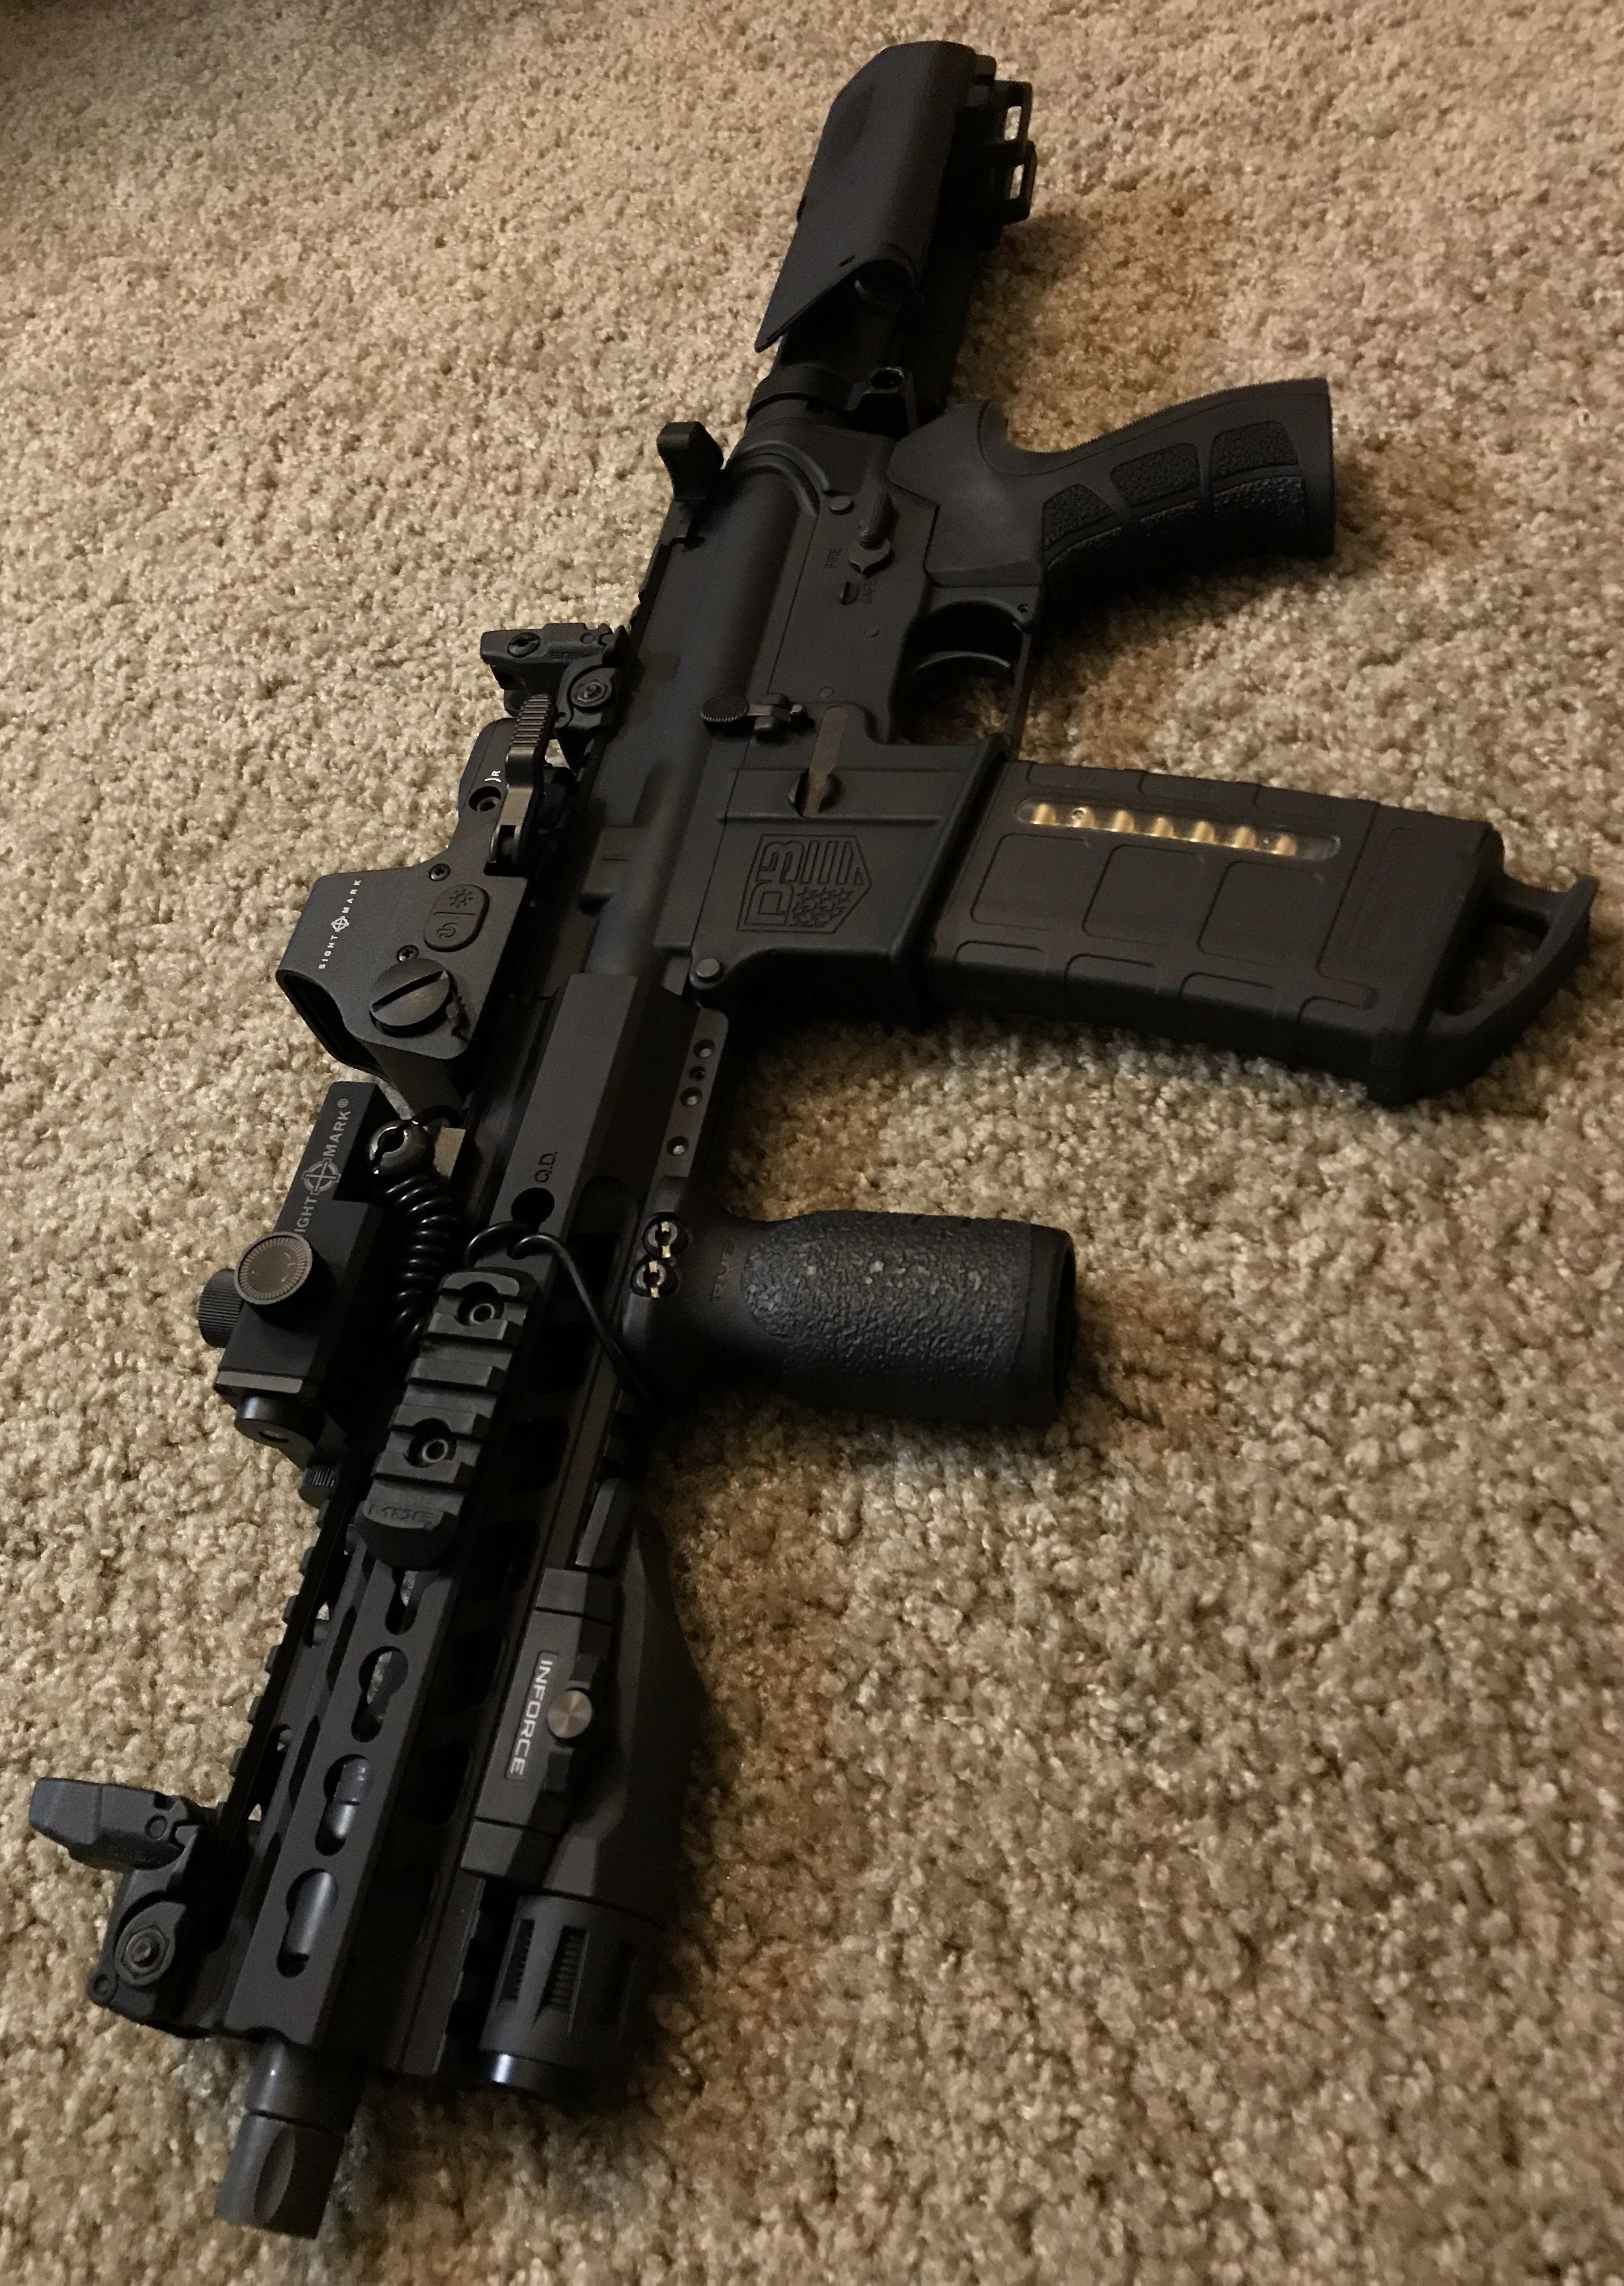 Weapon Papercraft Diamondback Db15 Pistol Upgraded to A New Sightmark Optic and